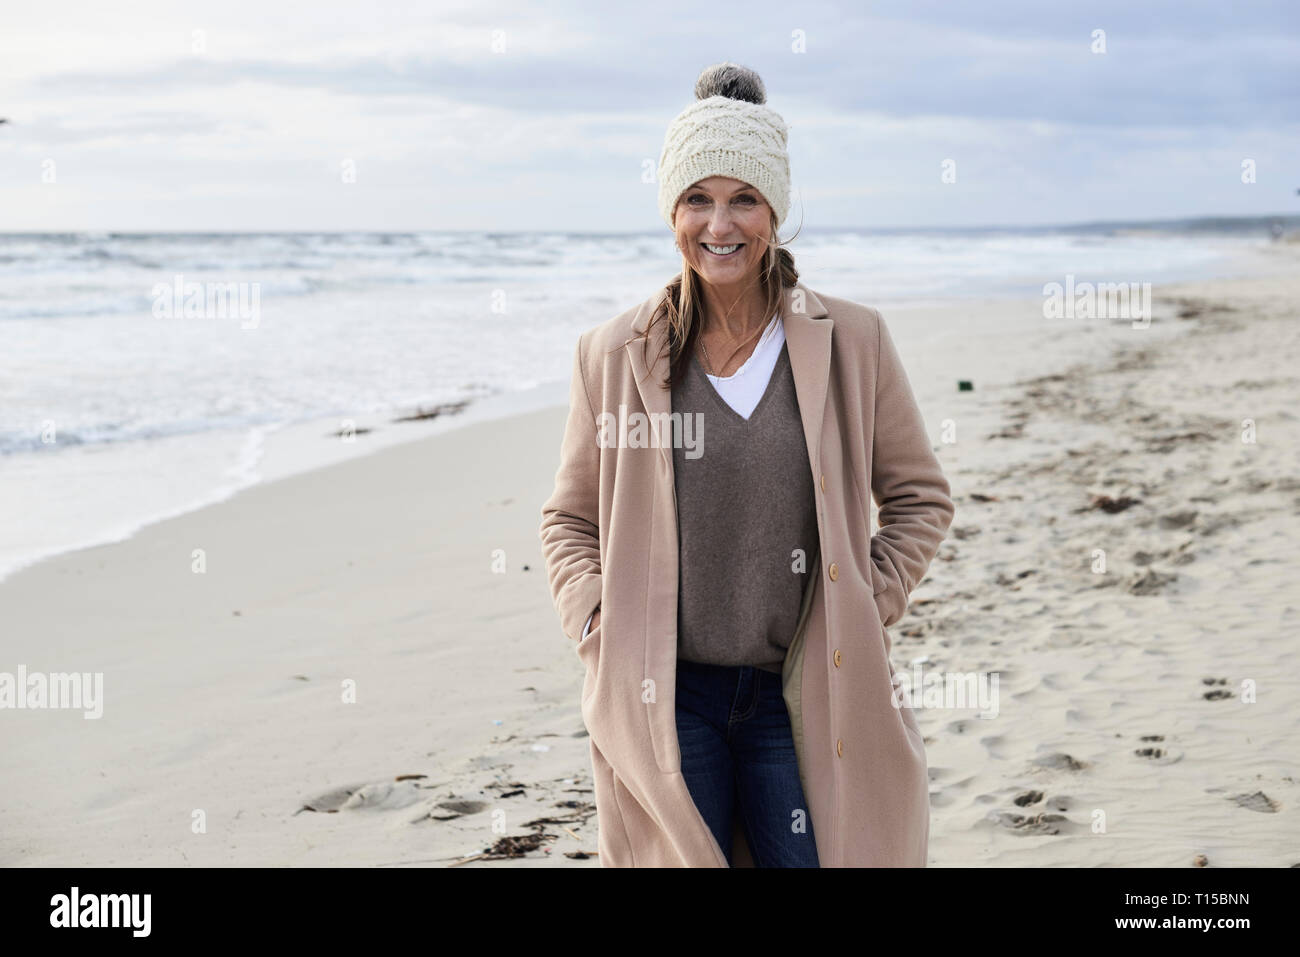 Spain, Menorca, portrait of smiling senior woman wearing bobble hat and coat on the beach in winter Stock Photo